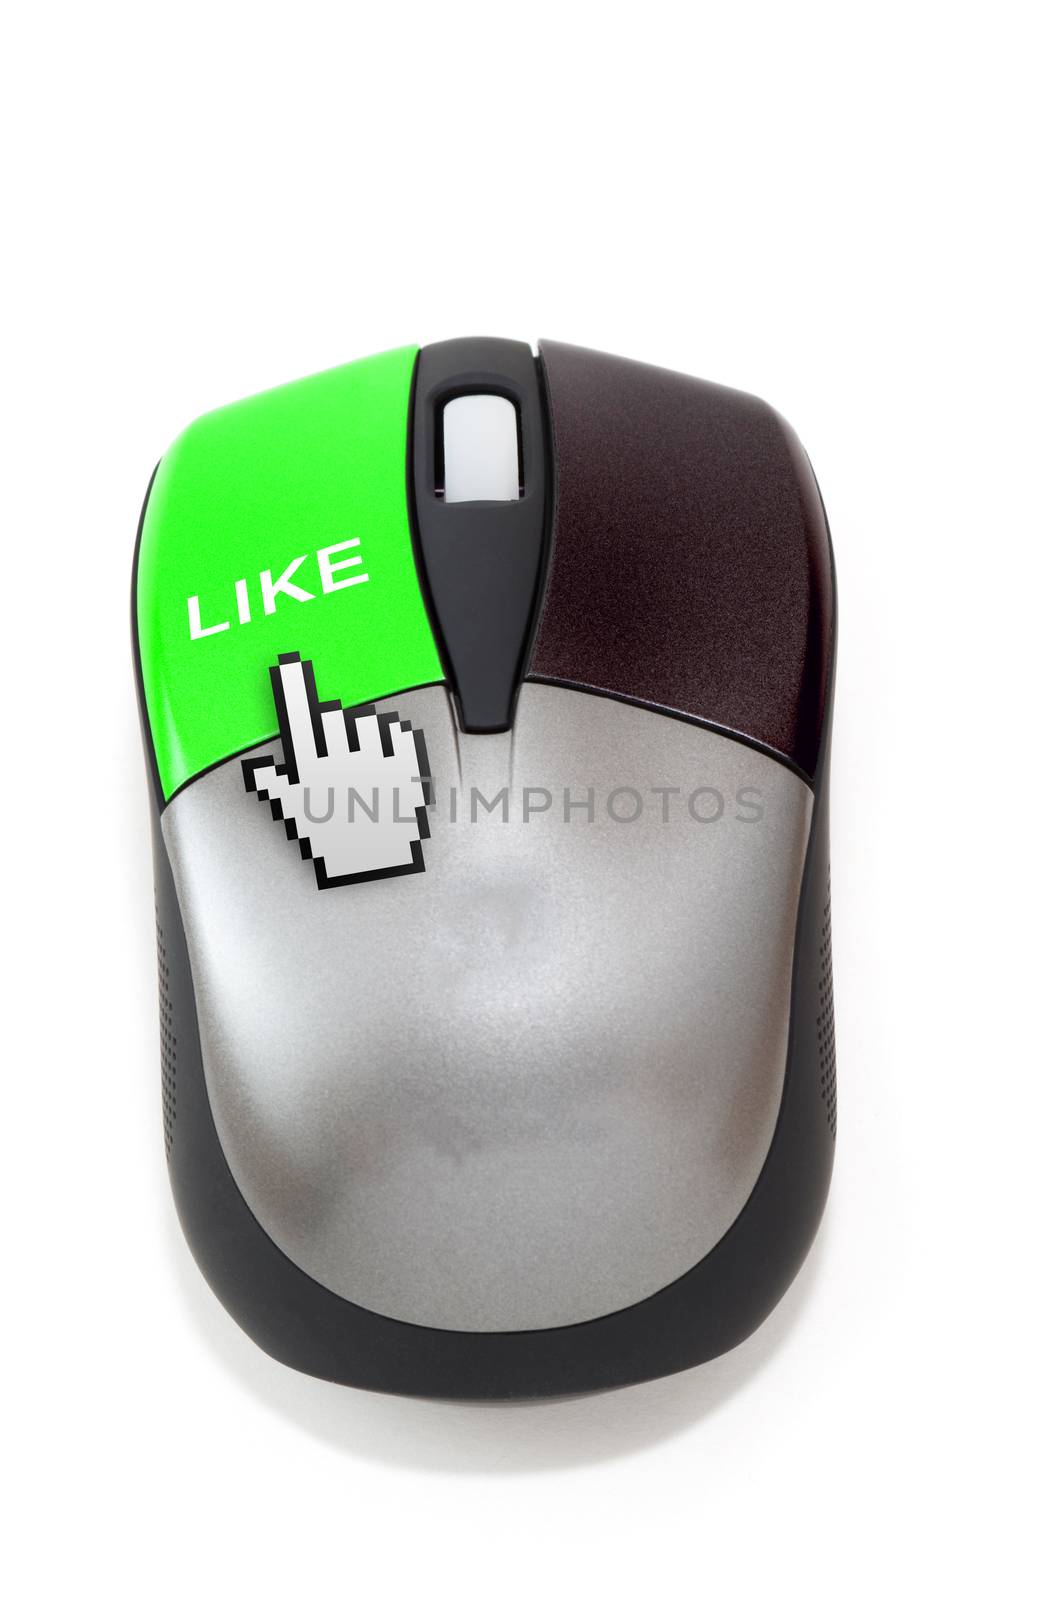 Hand cursor clicking on like button